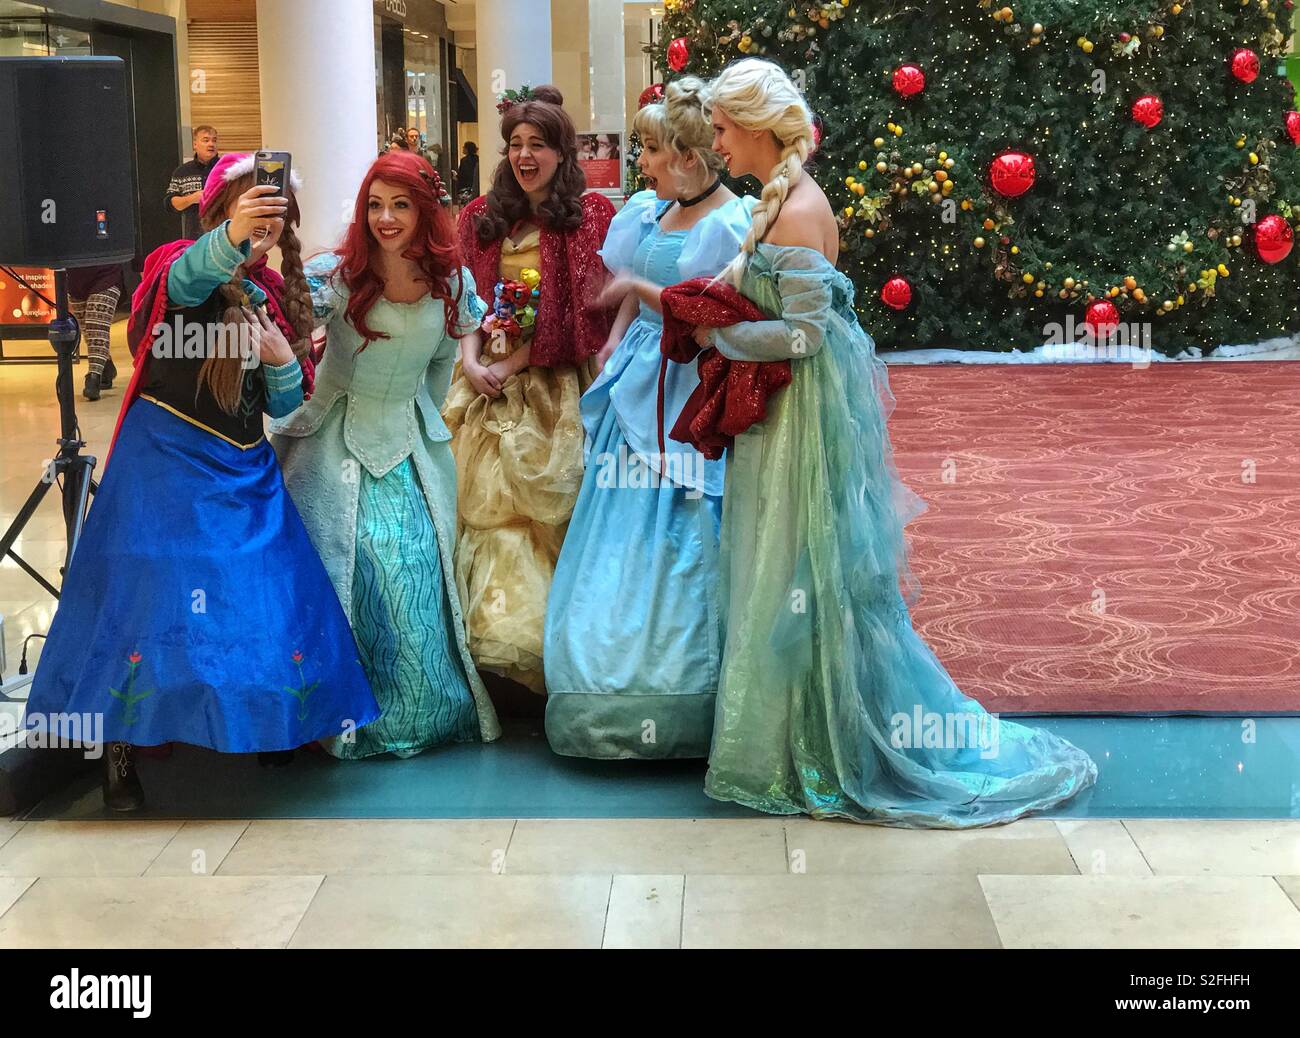 Princesses taking a selfie in front of a giant Christmas tree. Taken in downtown Calgary, Alberta, Canada. Stock Photo